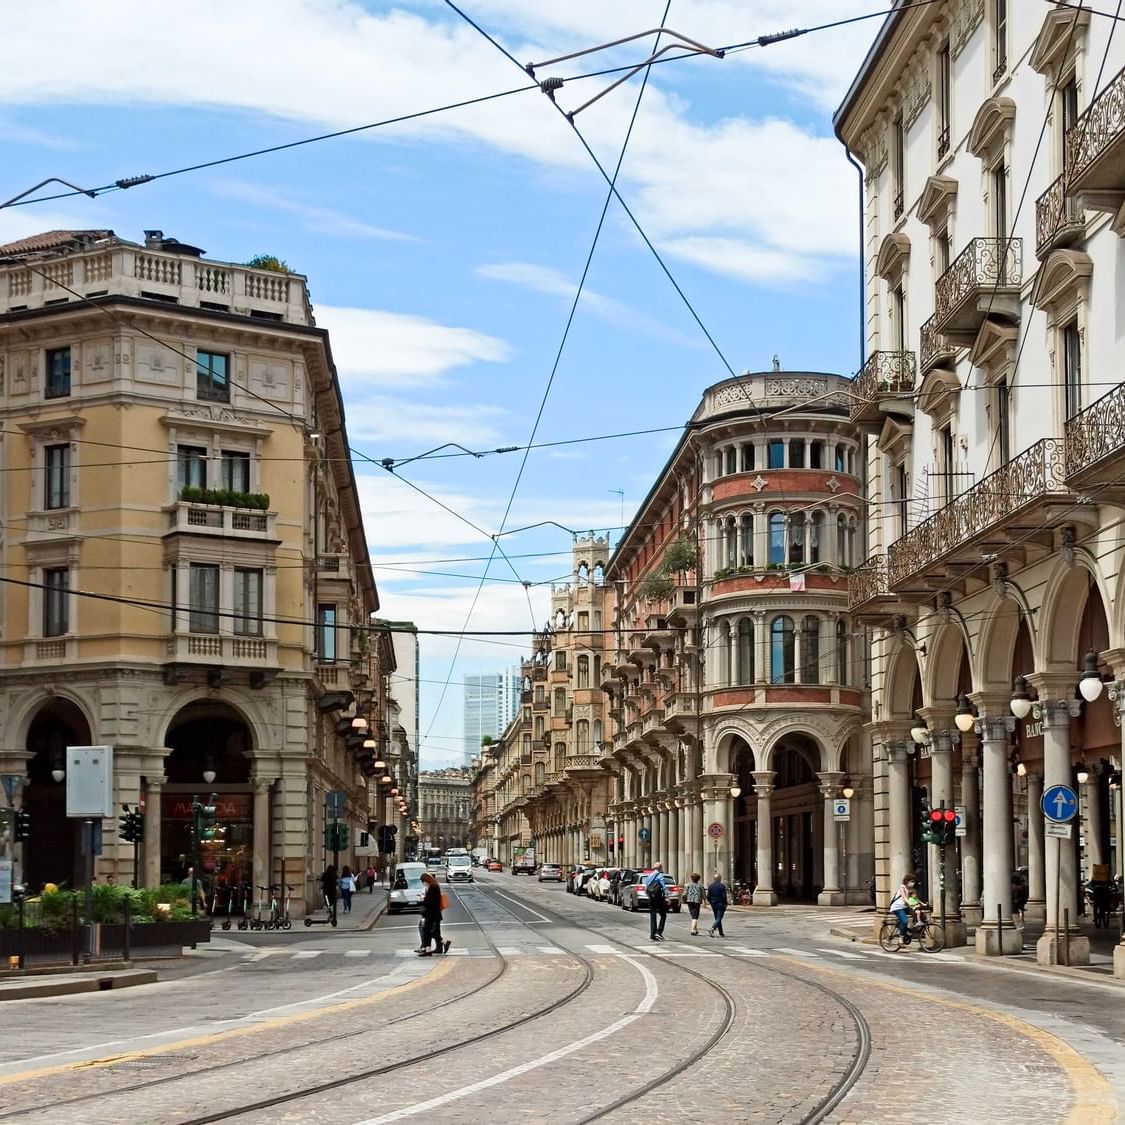 Shopping in Turin: my must-see destinations